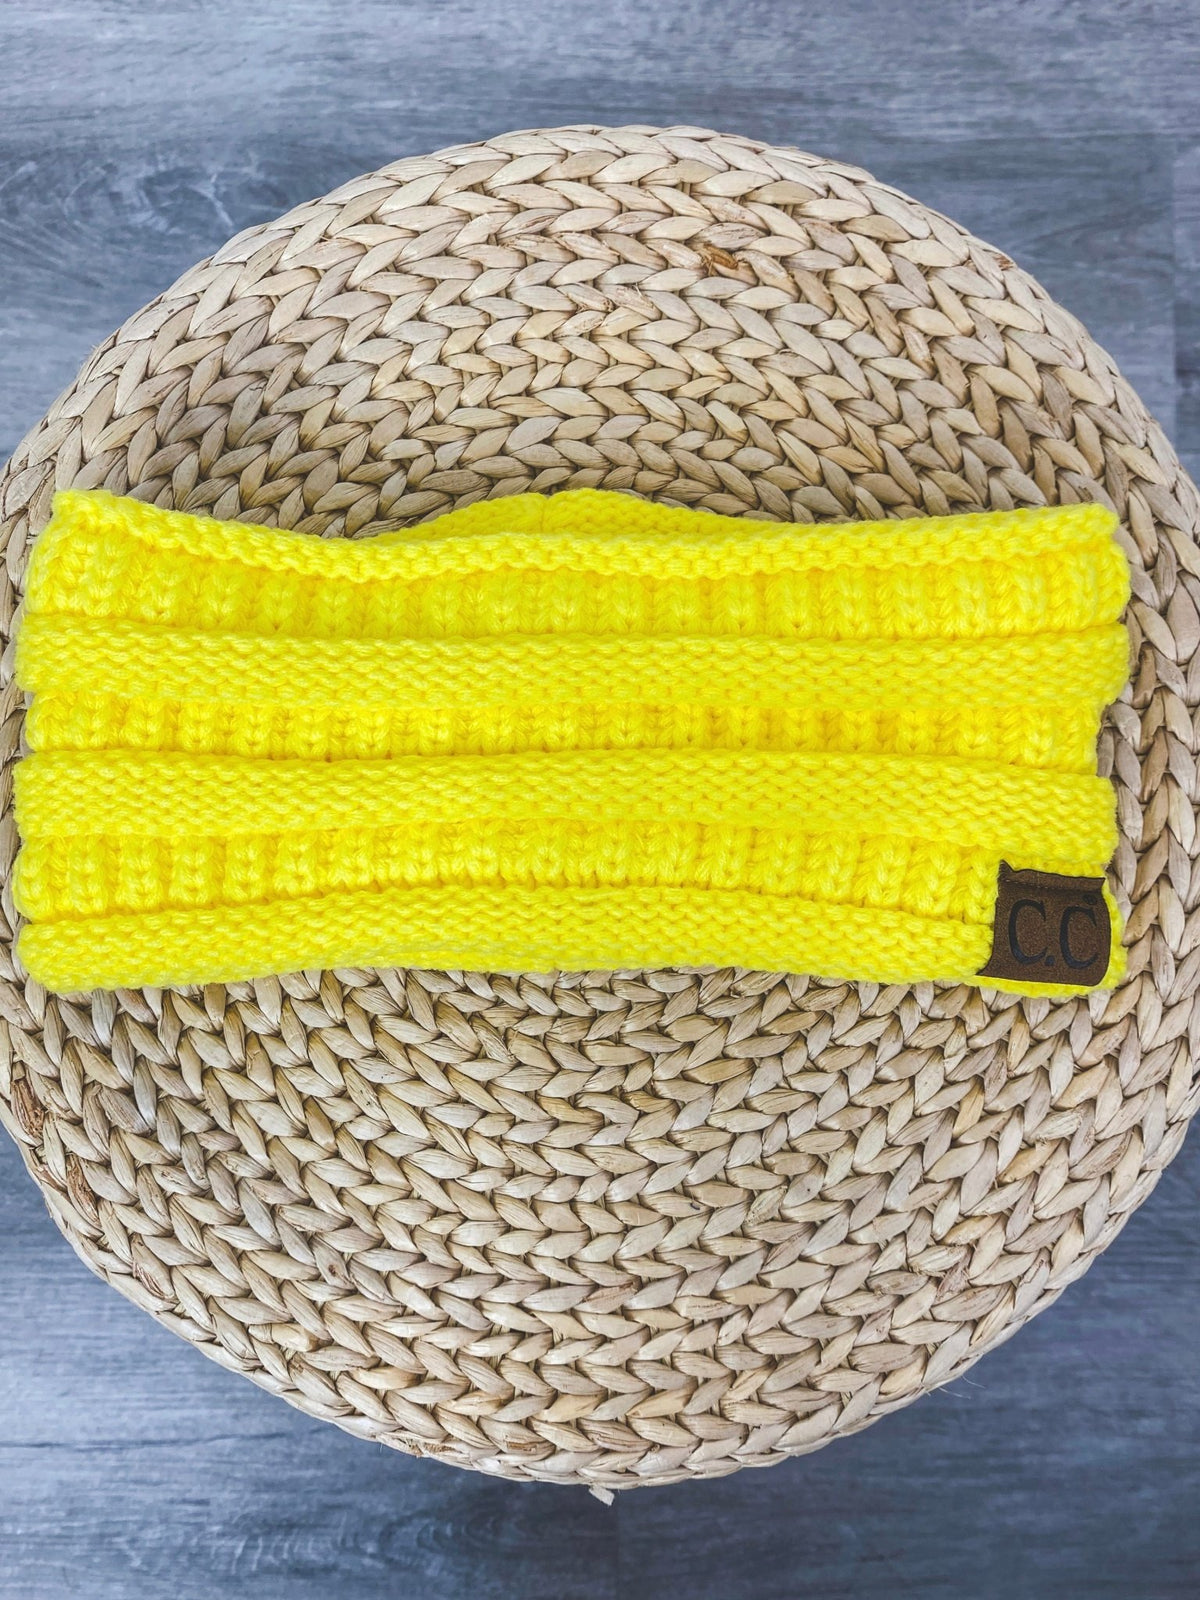 CC ribbed knit headwrap neon yellow - Cheaveux Company CC Beanies, Scarves and Gloves at Lush Fashion Lounge Boutique in Oklahoma City